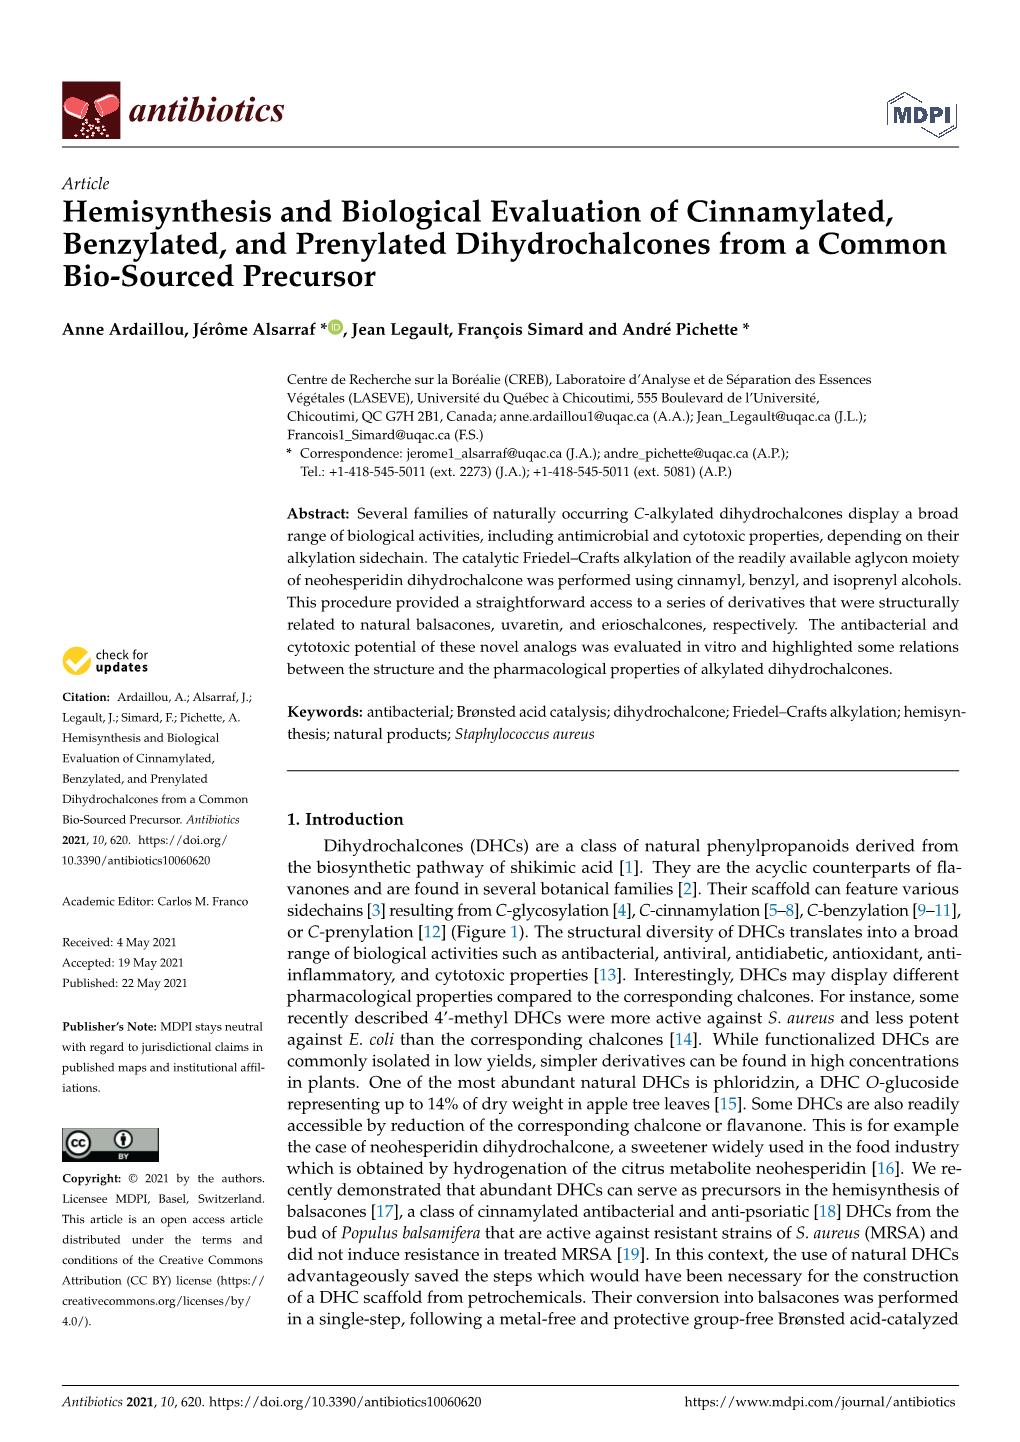 Hemisynthesis and Biological Evaluation of Cinnamylated, Benzylated, and Prenylated Dihydrochalcones from a Common Bio-Sourced Precursor